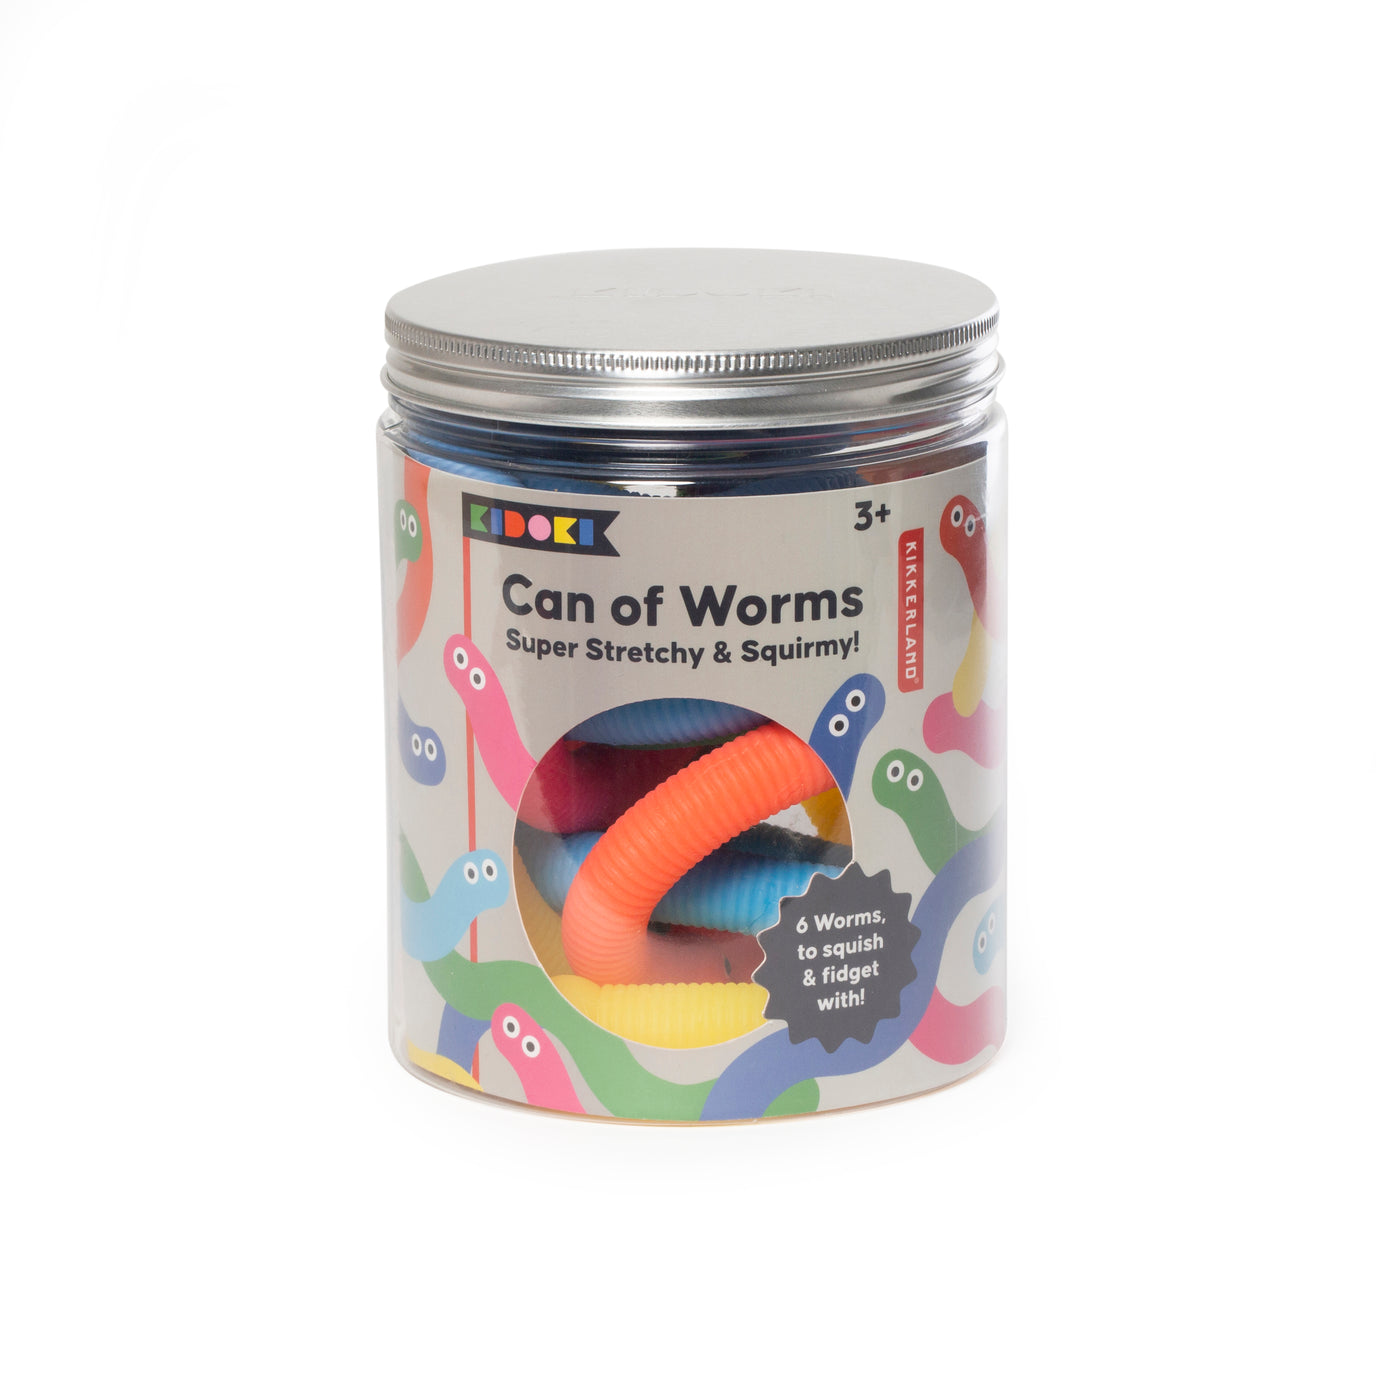 Kidoki Can of Worms Fidget Toy – Can of 6